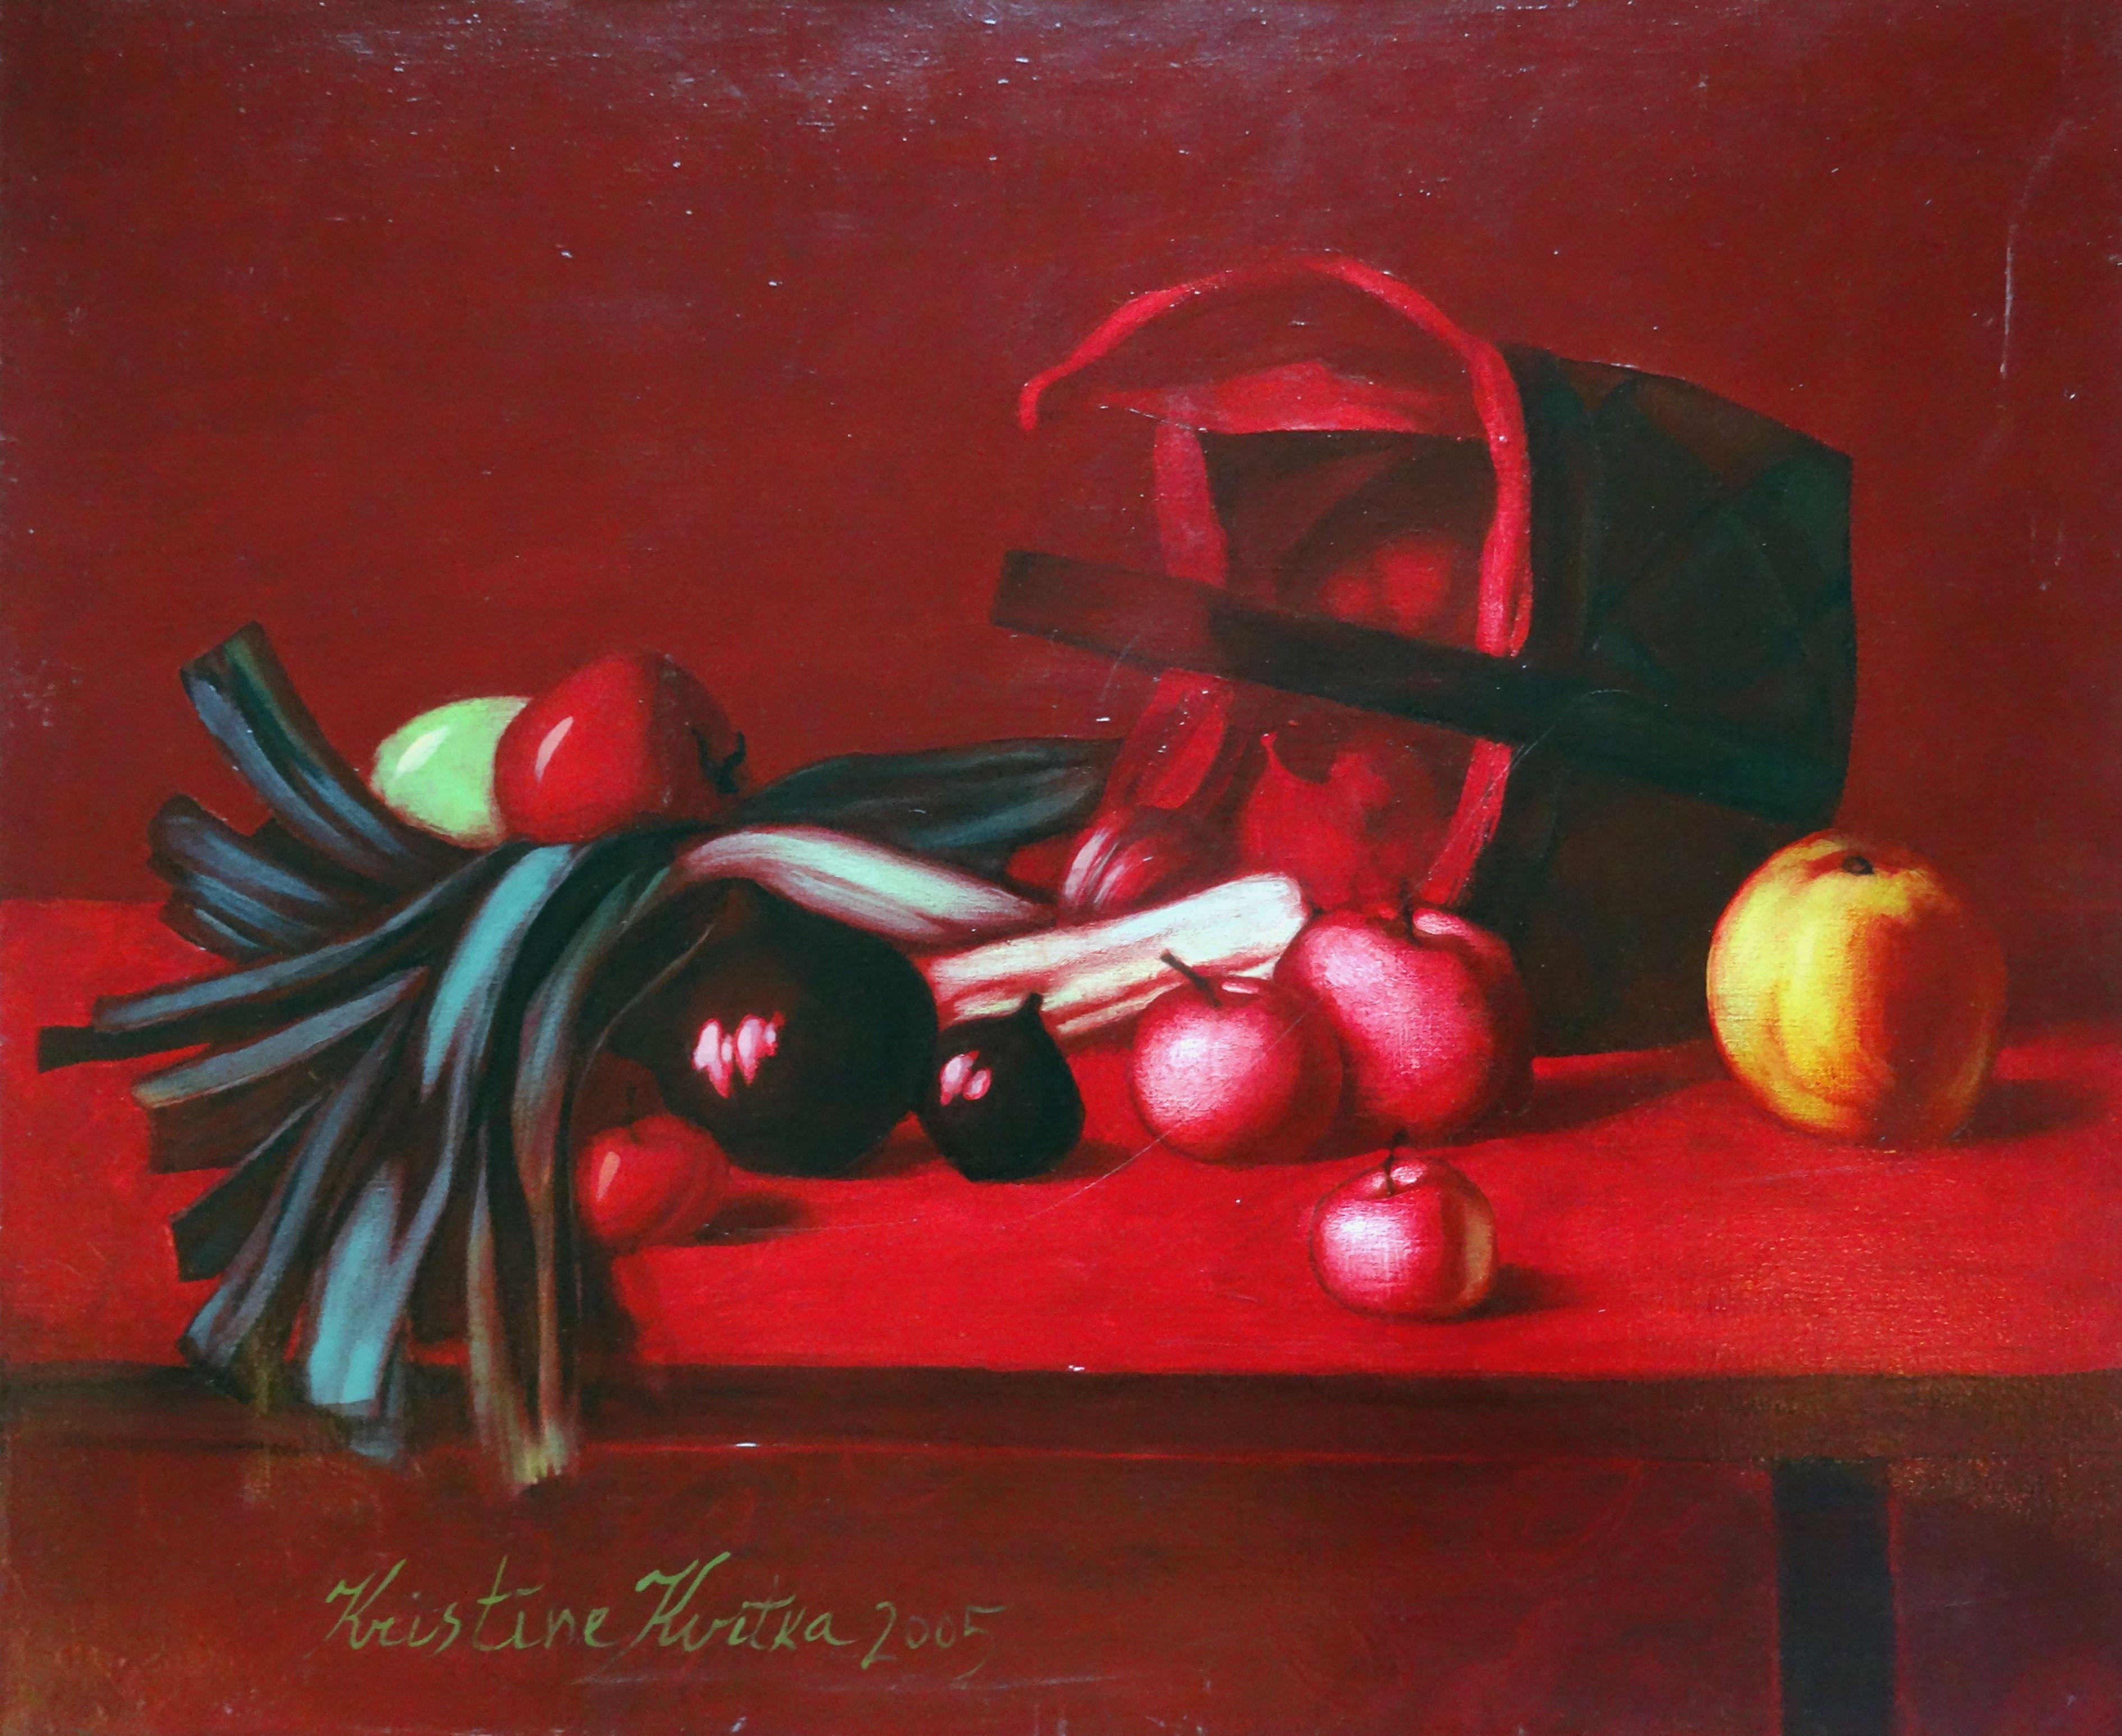  Still life with onions. 2005, oil on canvas, 60x73 cm - Painting by Kristine Kvitka